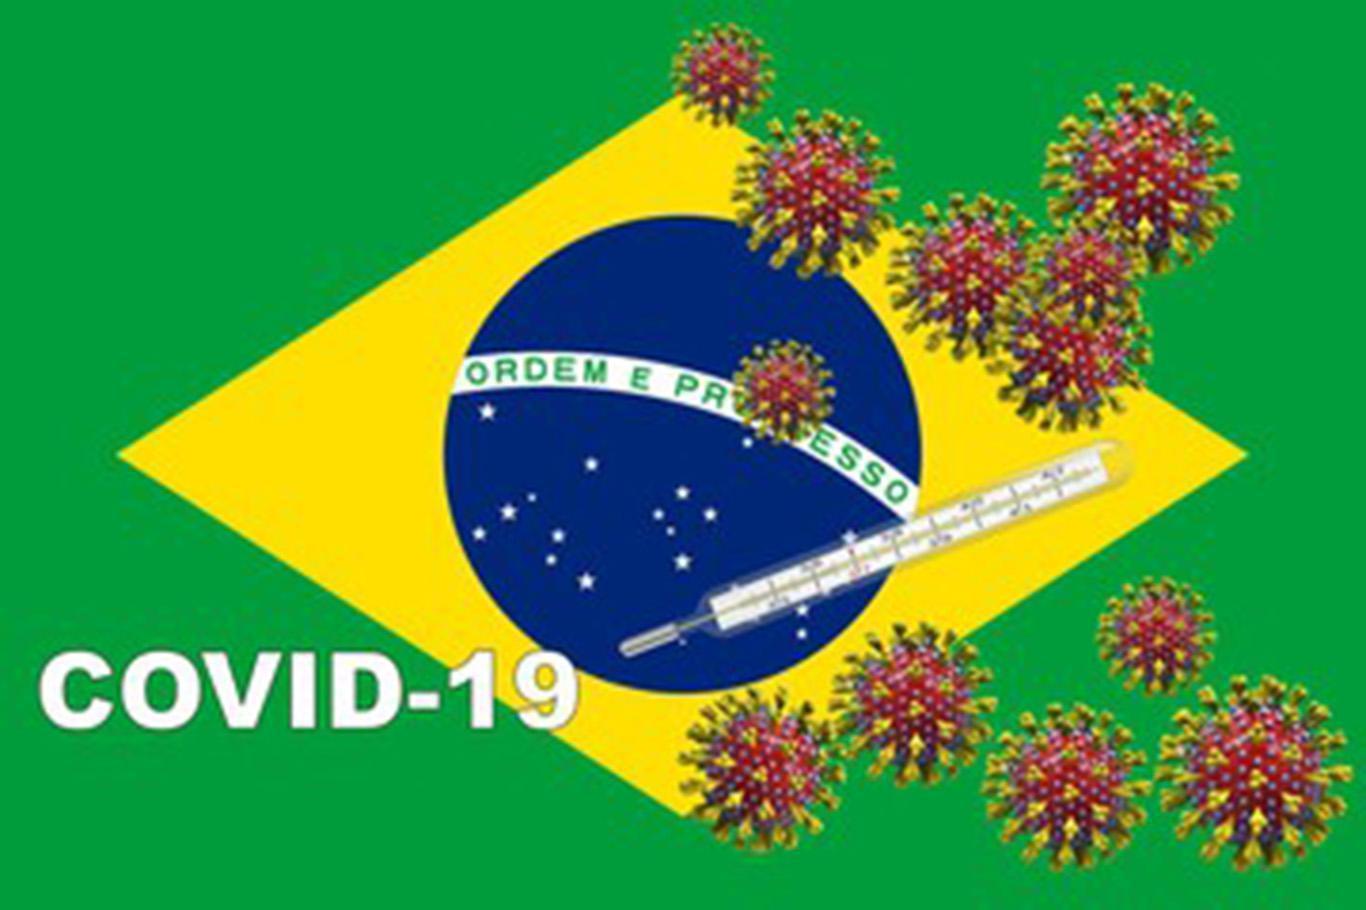 Brazil reports 1,039 new deaths from coronavirus over the past 24 hours